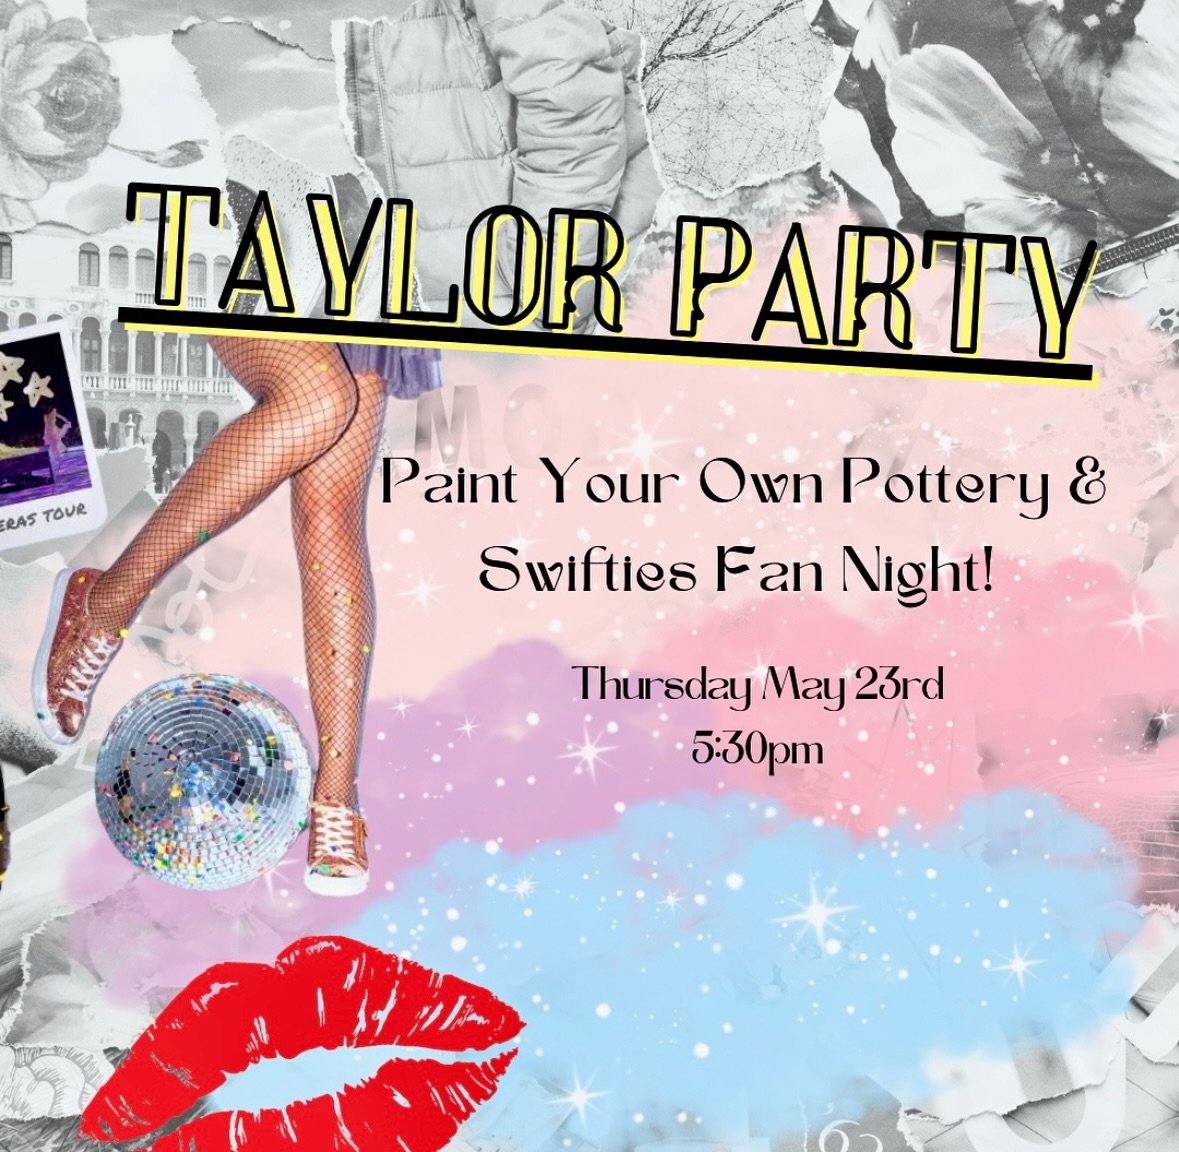 Buy Your Tickets Today! DistractionsArtStudio.com 

Calling all my fellow Swifties! Please join us for a night of Paint Your Own Pottery! Tonight is themed around our love for everything Taylor! Our shelves will be stocked with Pottery for purchase t